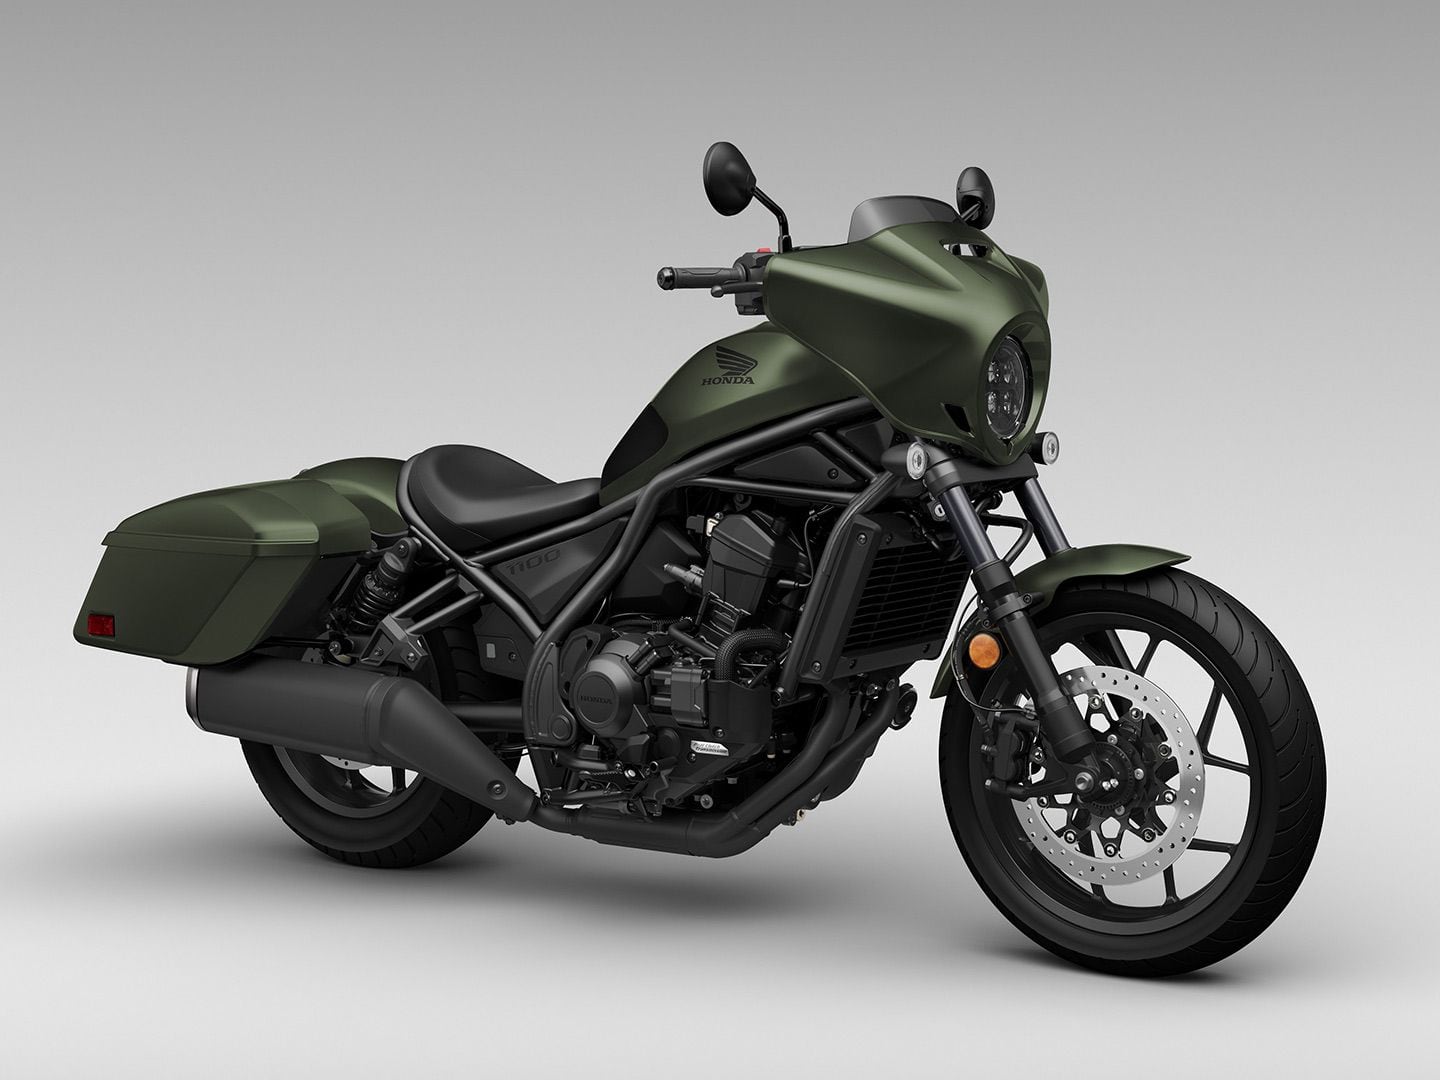 For 2024, Honda is bringing back the Rebel 1100T touring cruiser unchanged, save for this new matte green color. Prices start at $10,699.